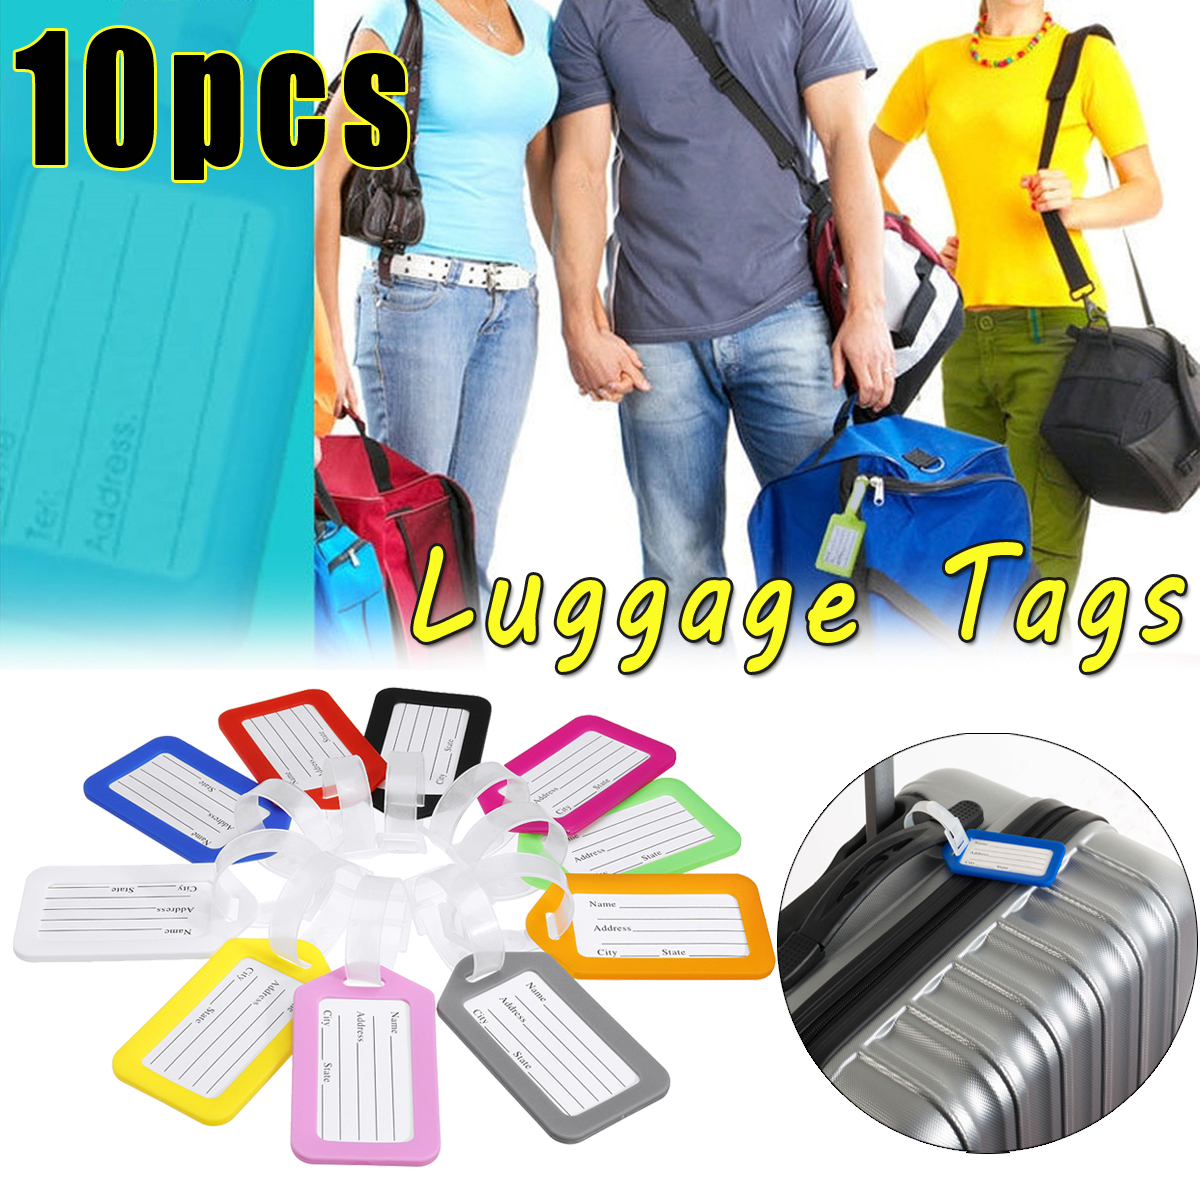 10-Pcs-Luggage-Bag-Tag-Name-Address-ID-Label-Plastic-Travel-Bag-Tags-for-Suitcase-Bag-1714336-1